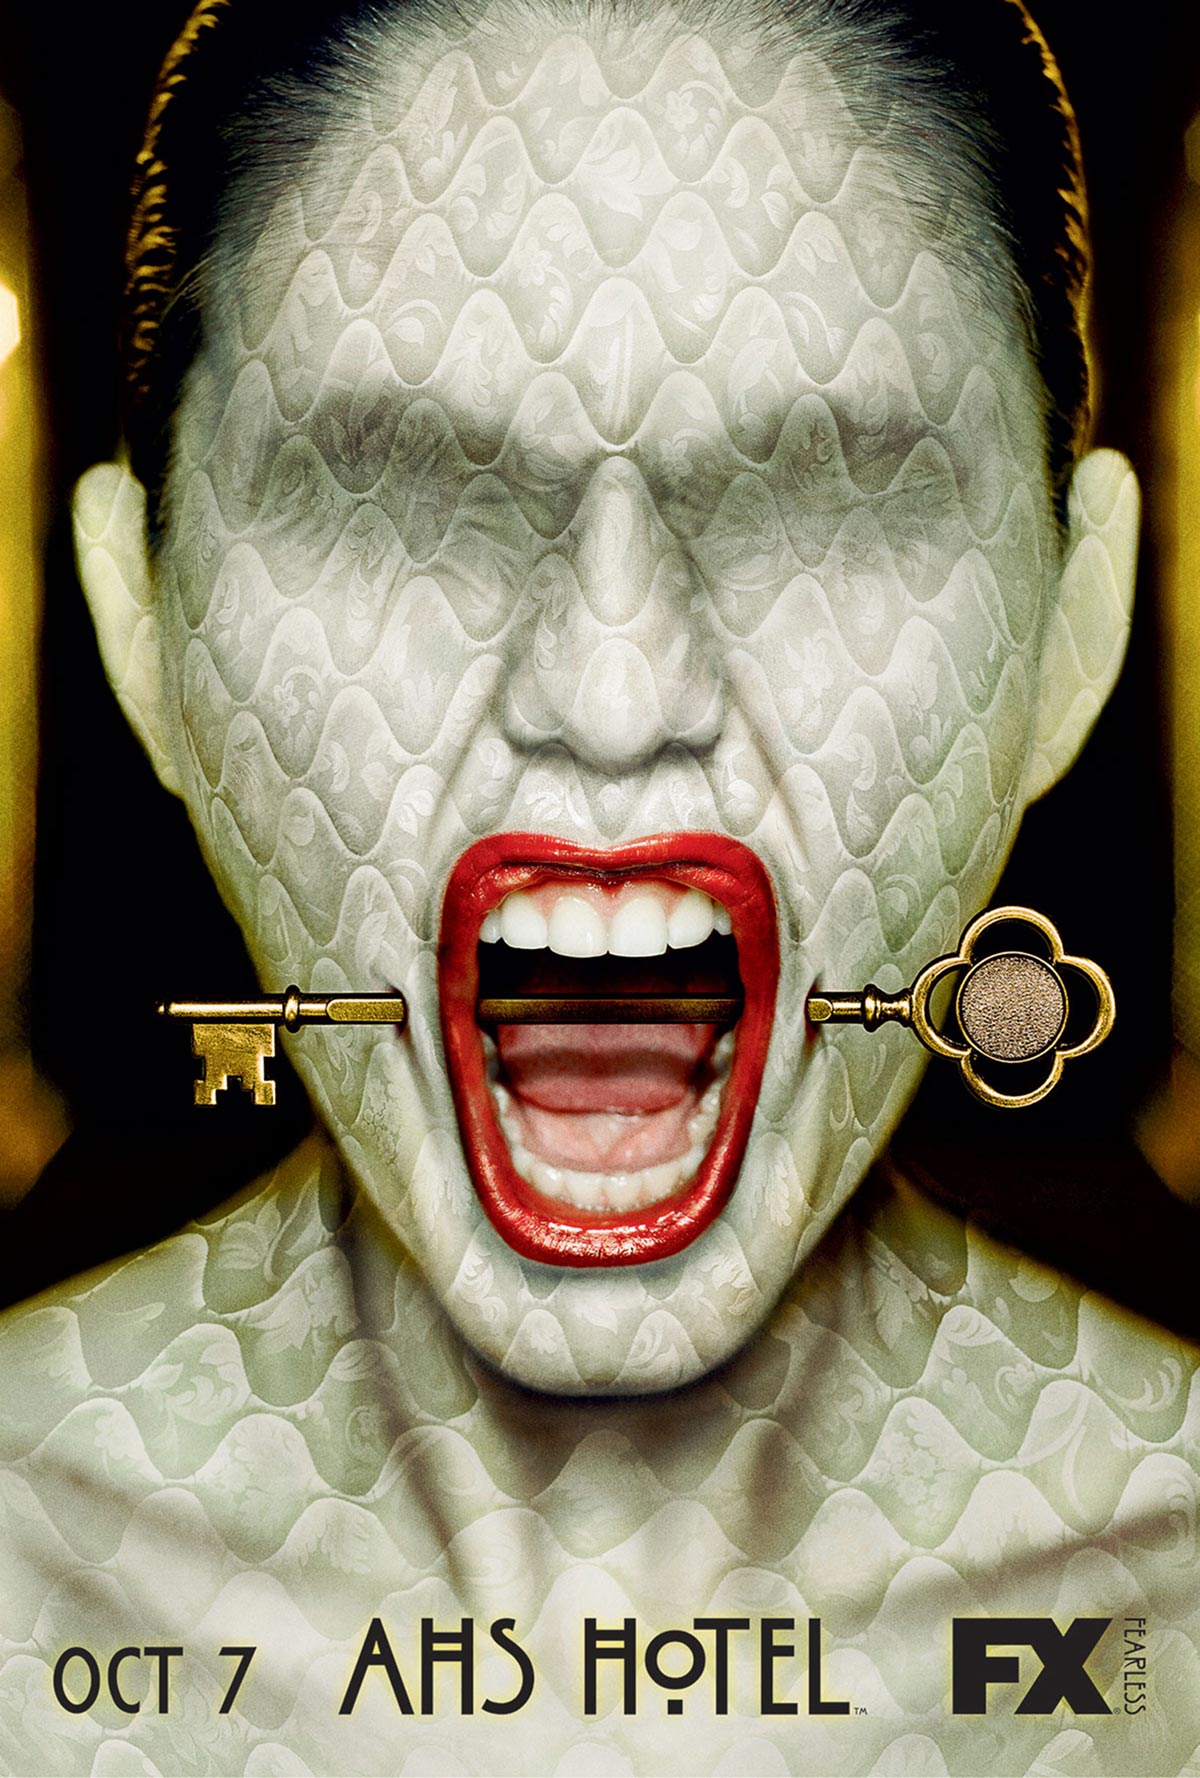 011_dreamogram-iconisus-key-art-movie-poster-american-horror-story-hotel-1_vertical-cover